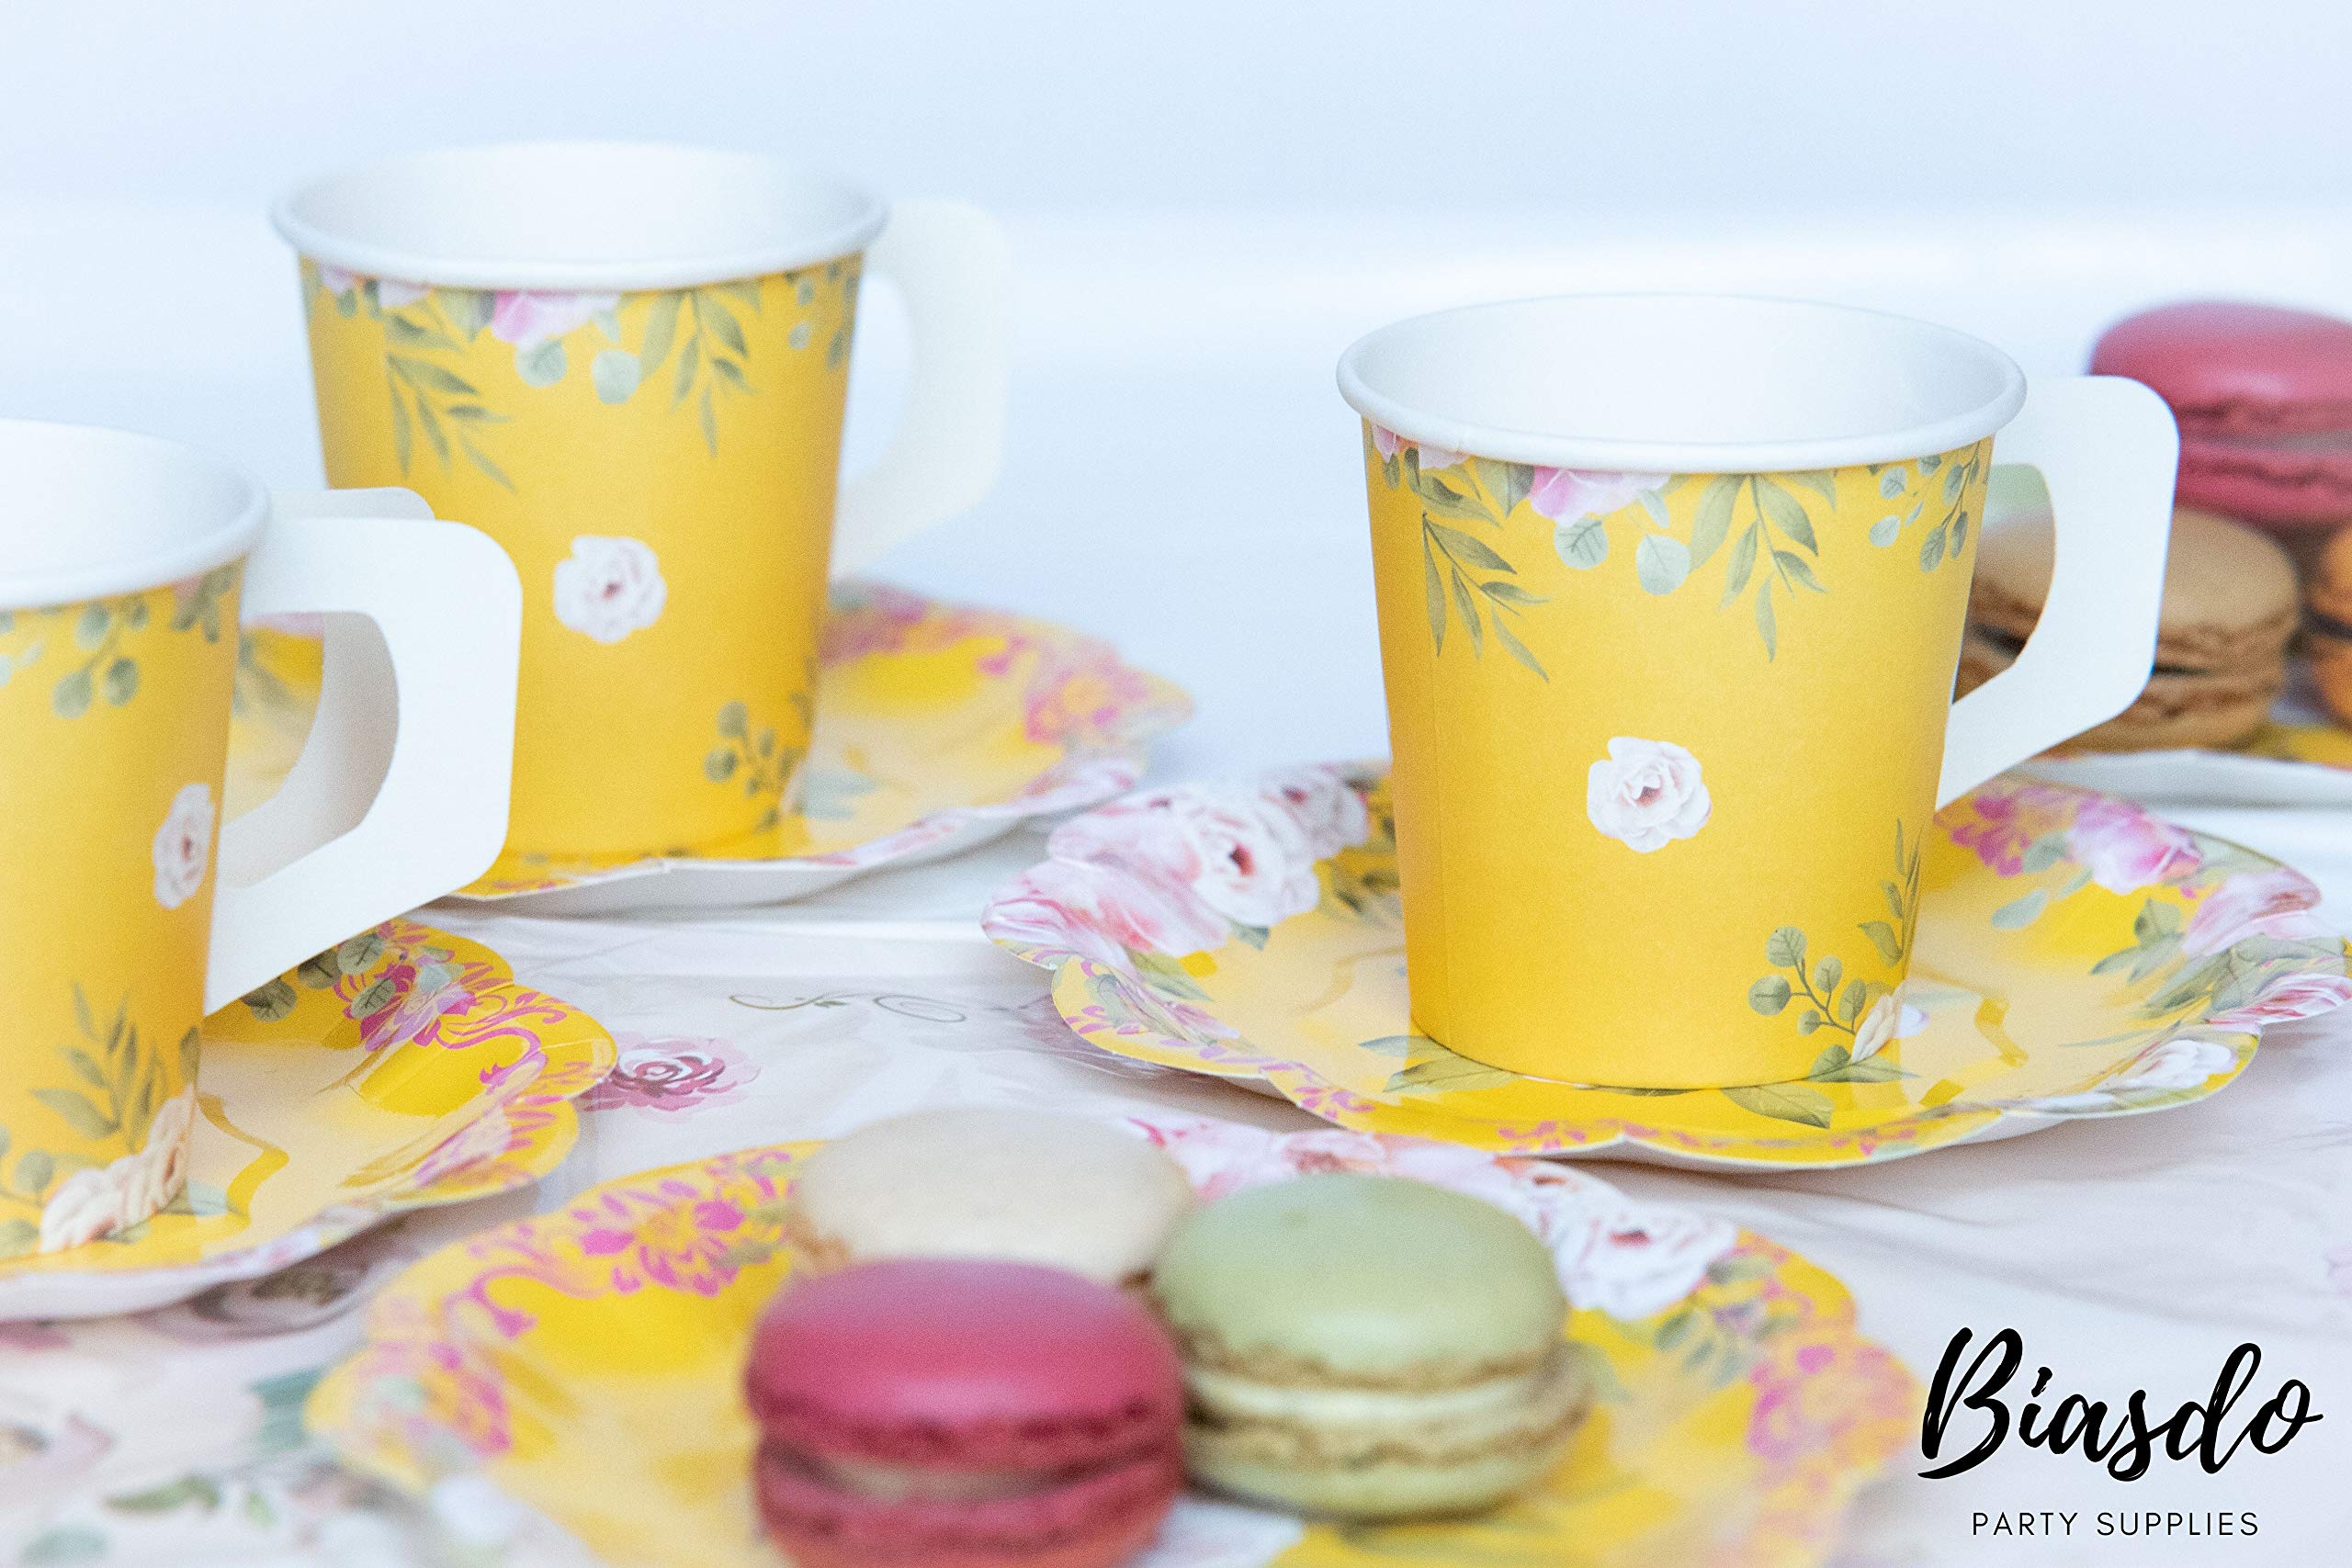 FLOWER SIPPERS (24 Pack) 7oz Paper Tea Cups Party Decorations, 24 Disposable Drink Cups w/Handles, Matching Dessert Saucer Plates, Tea Party Supplies, Birthday Party Favors, Bright Yellow Decor